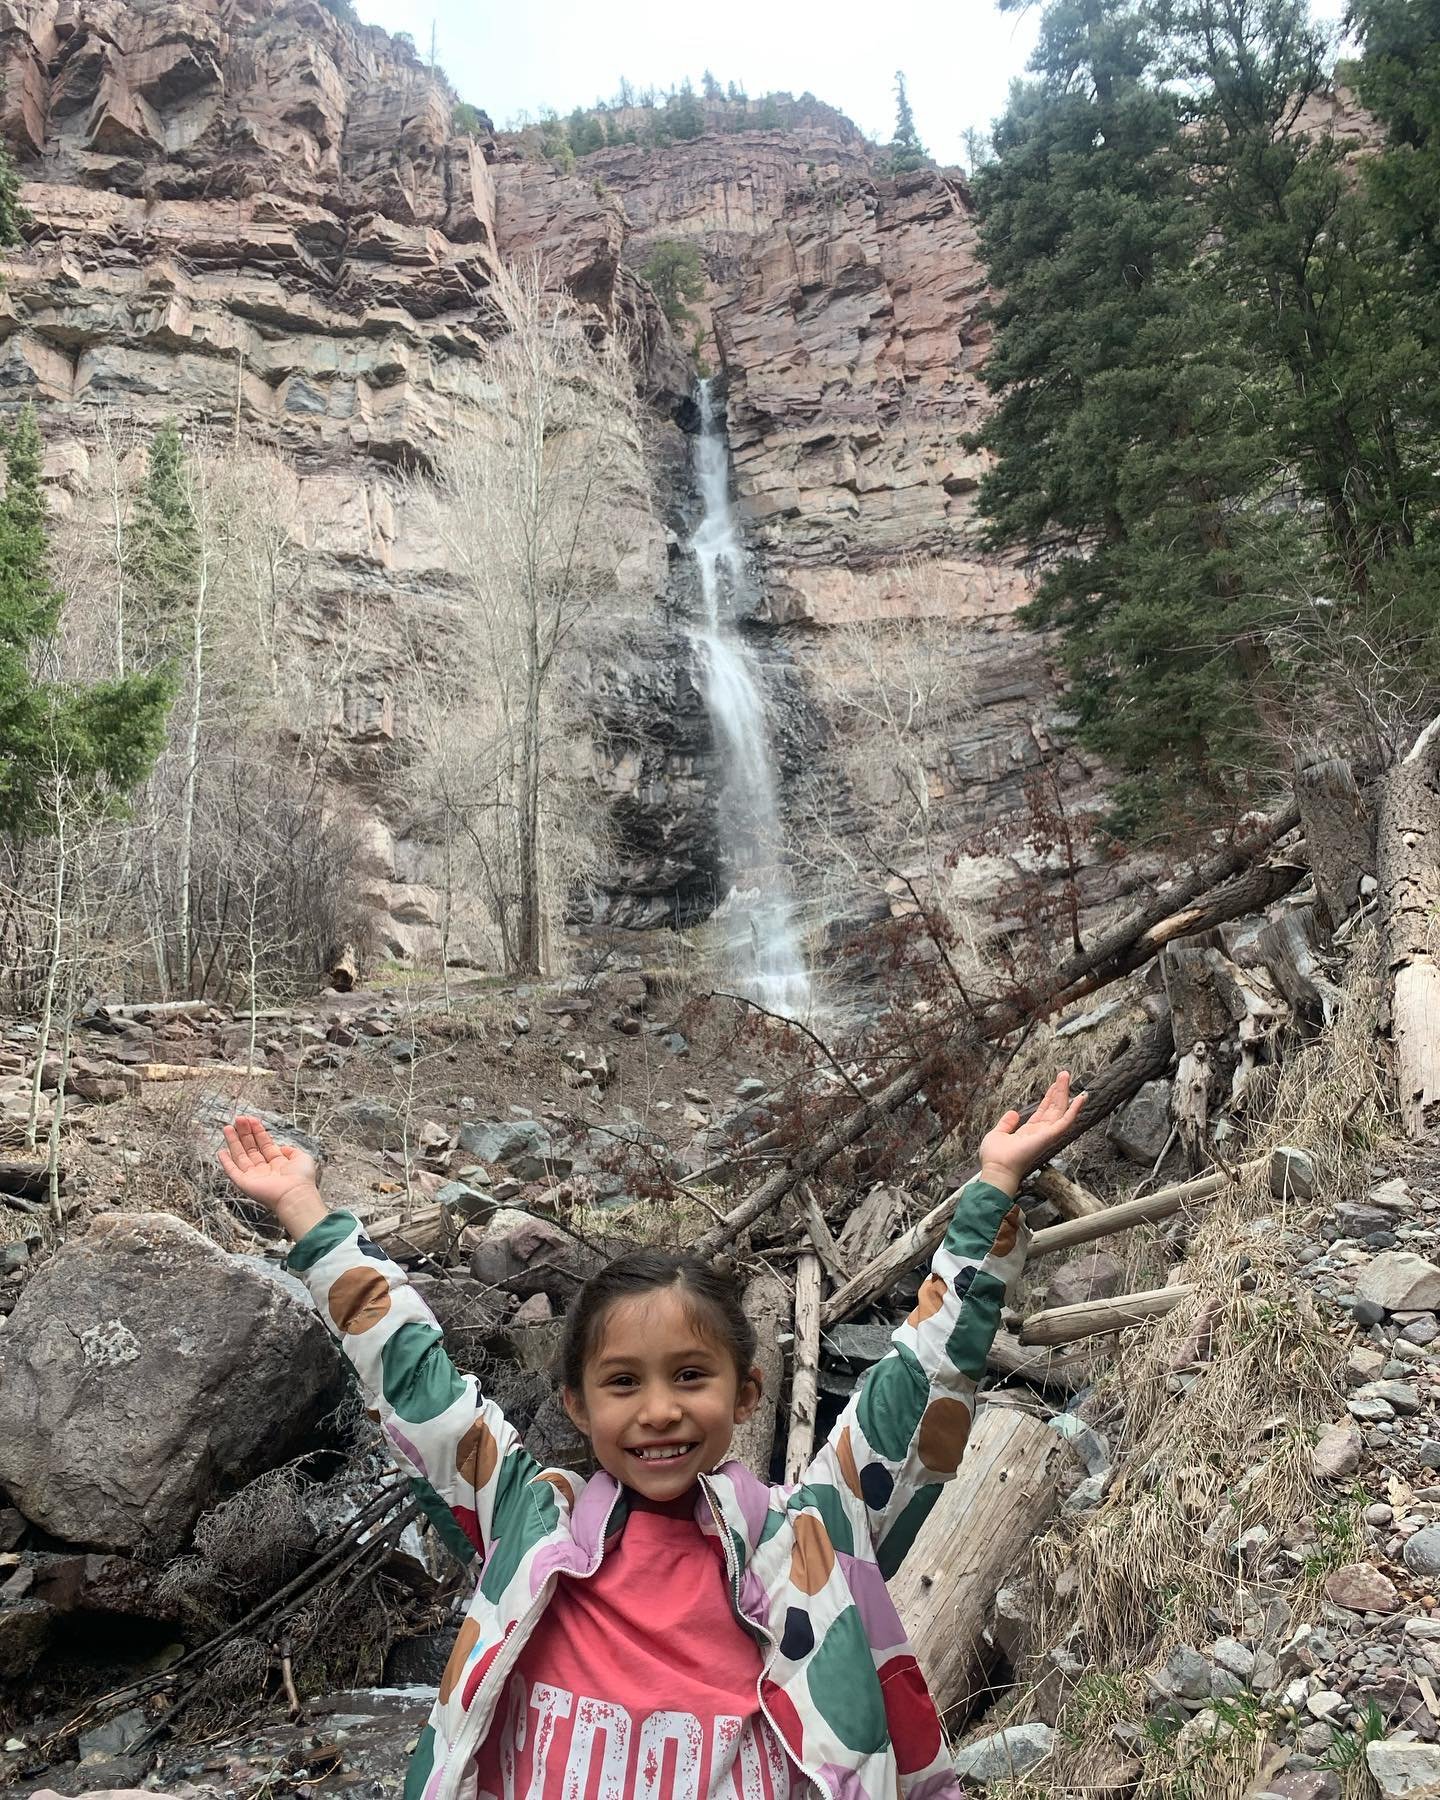 Girl with her arms up and waterfall in the background